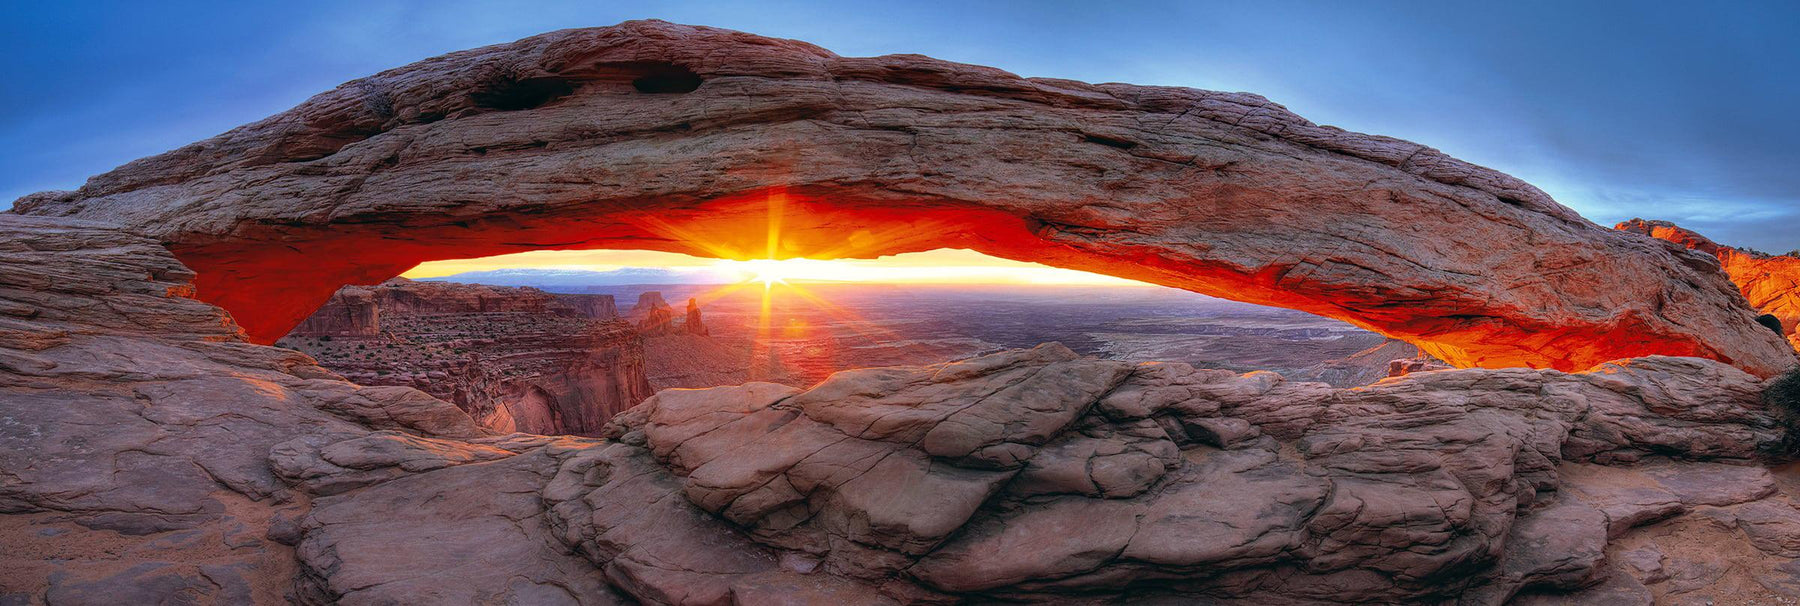 Sunburst shining through the stone arch and onto the rock valley of Canyonlands National Park Utah